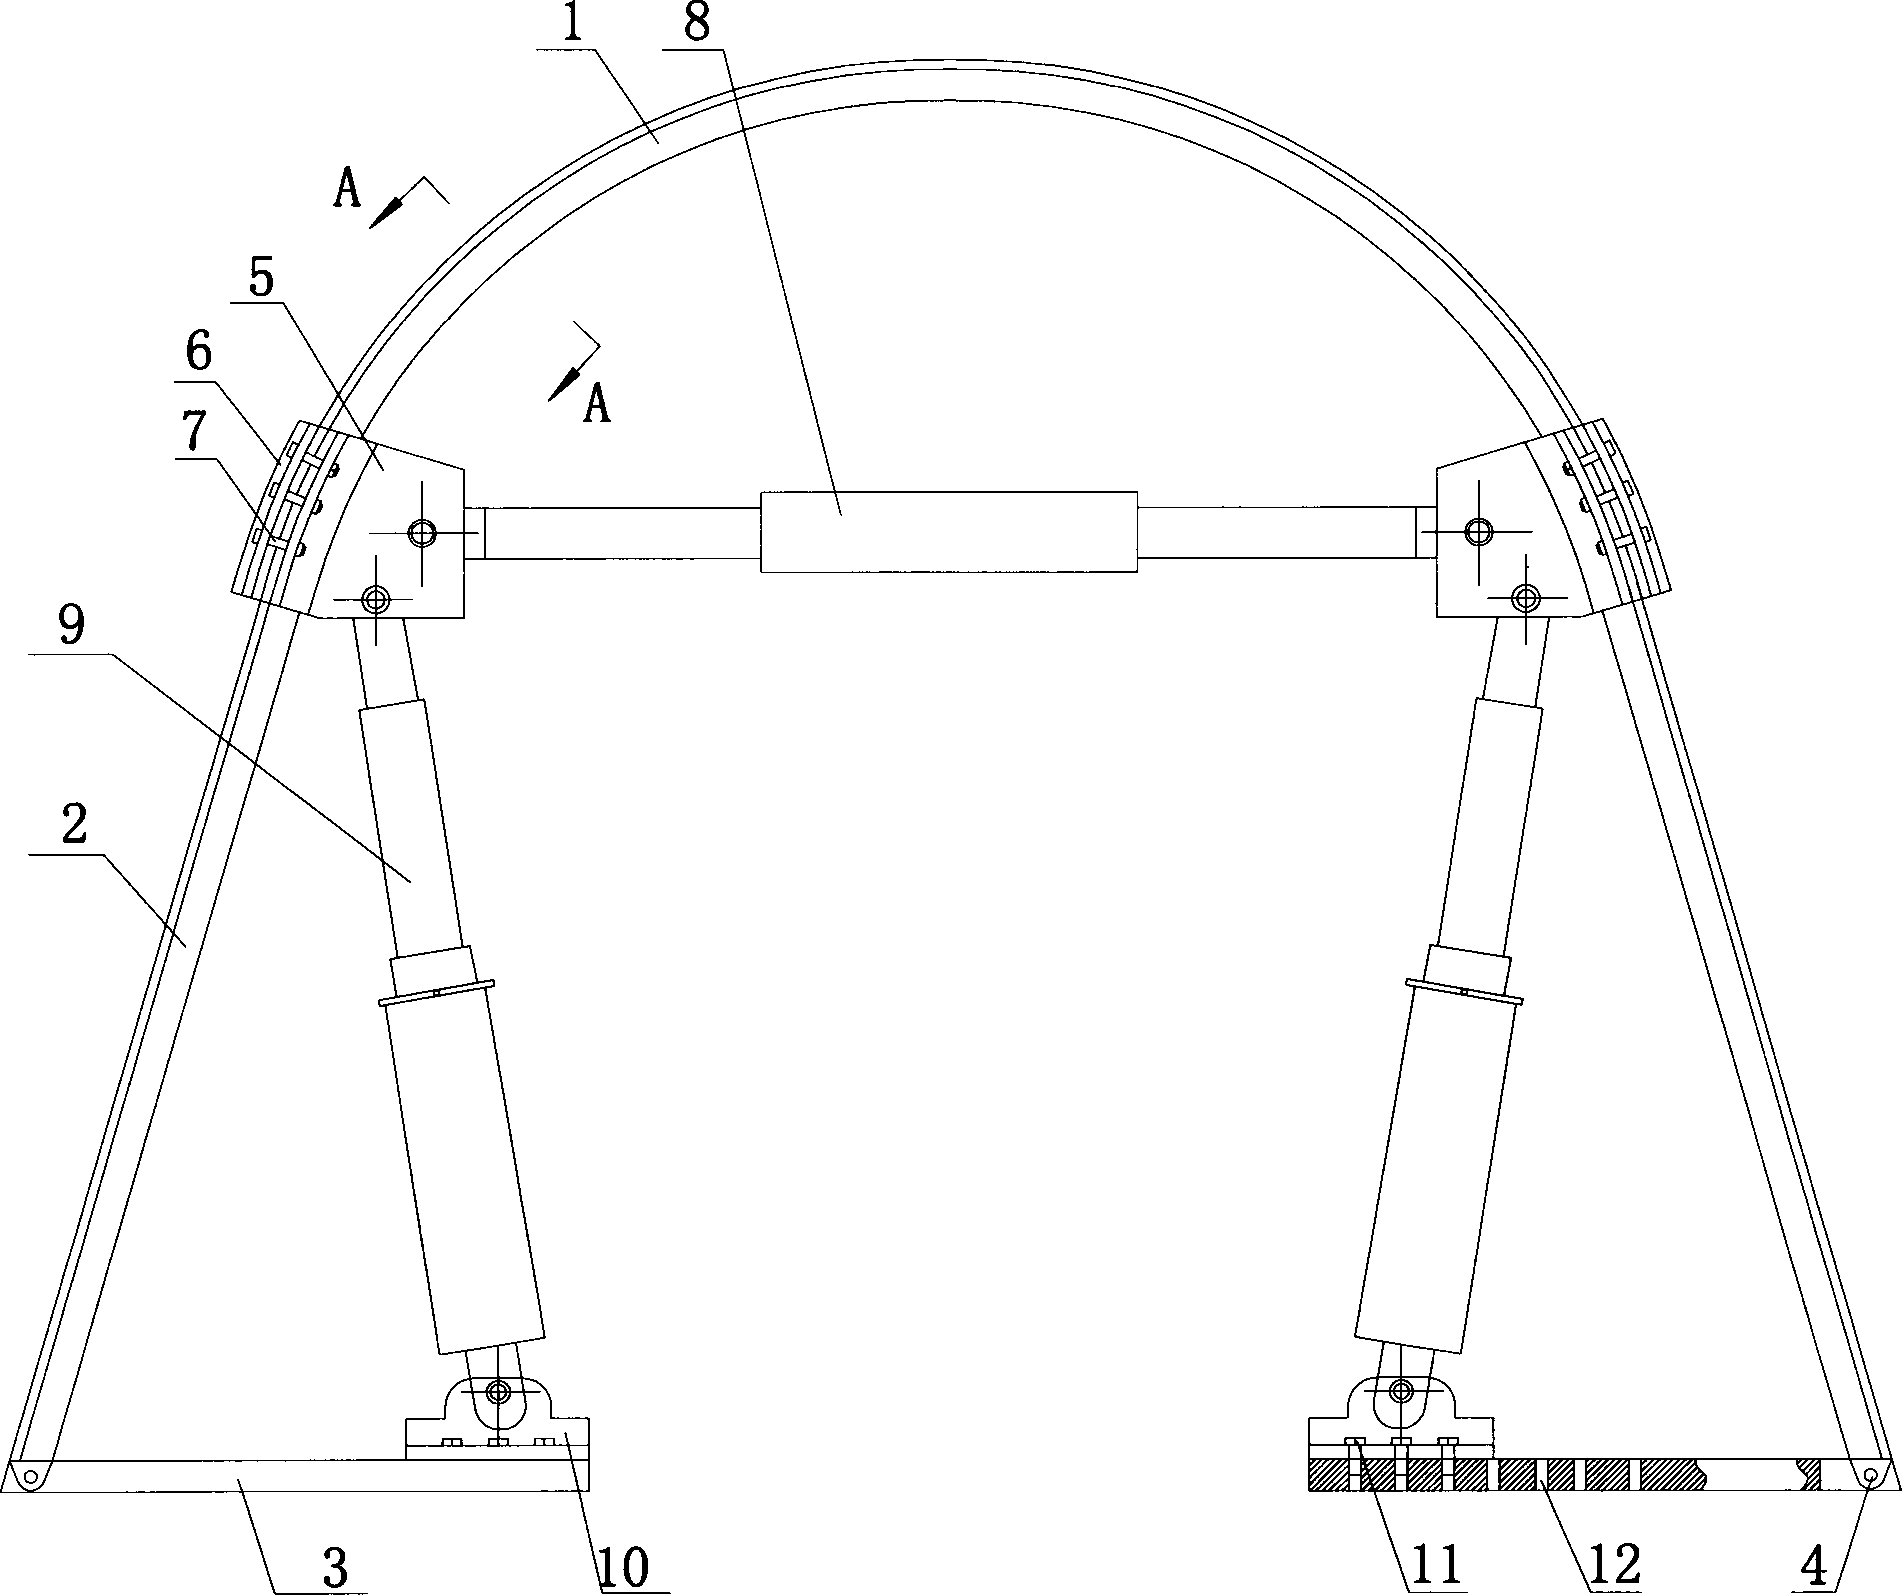 U-shaped steel bracket capable of actively controlling deformation of surrounding rocks